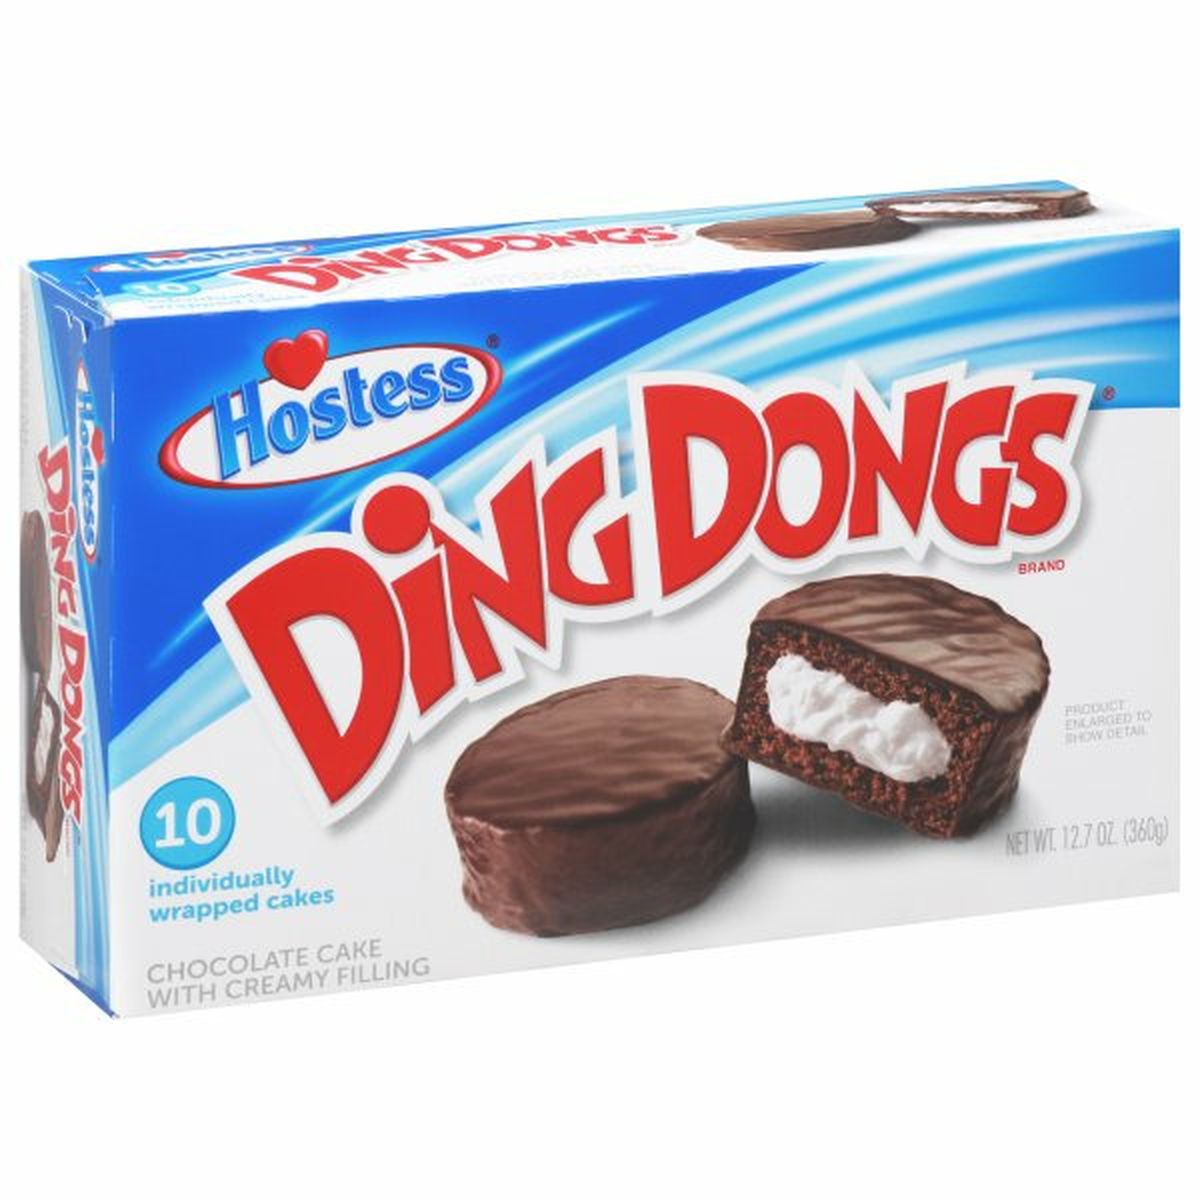 Calories in Hostess Ding Dongs Chocolate Cake